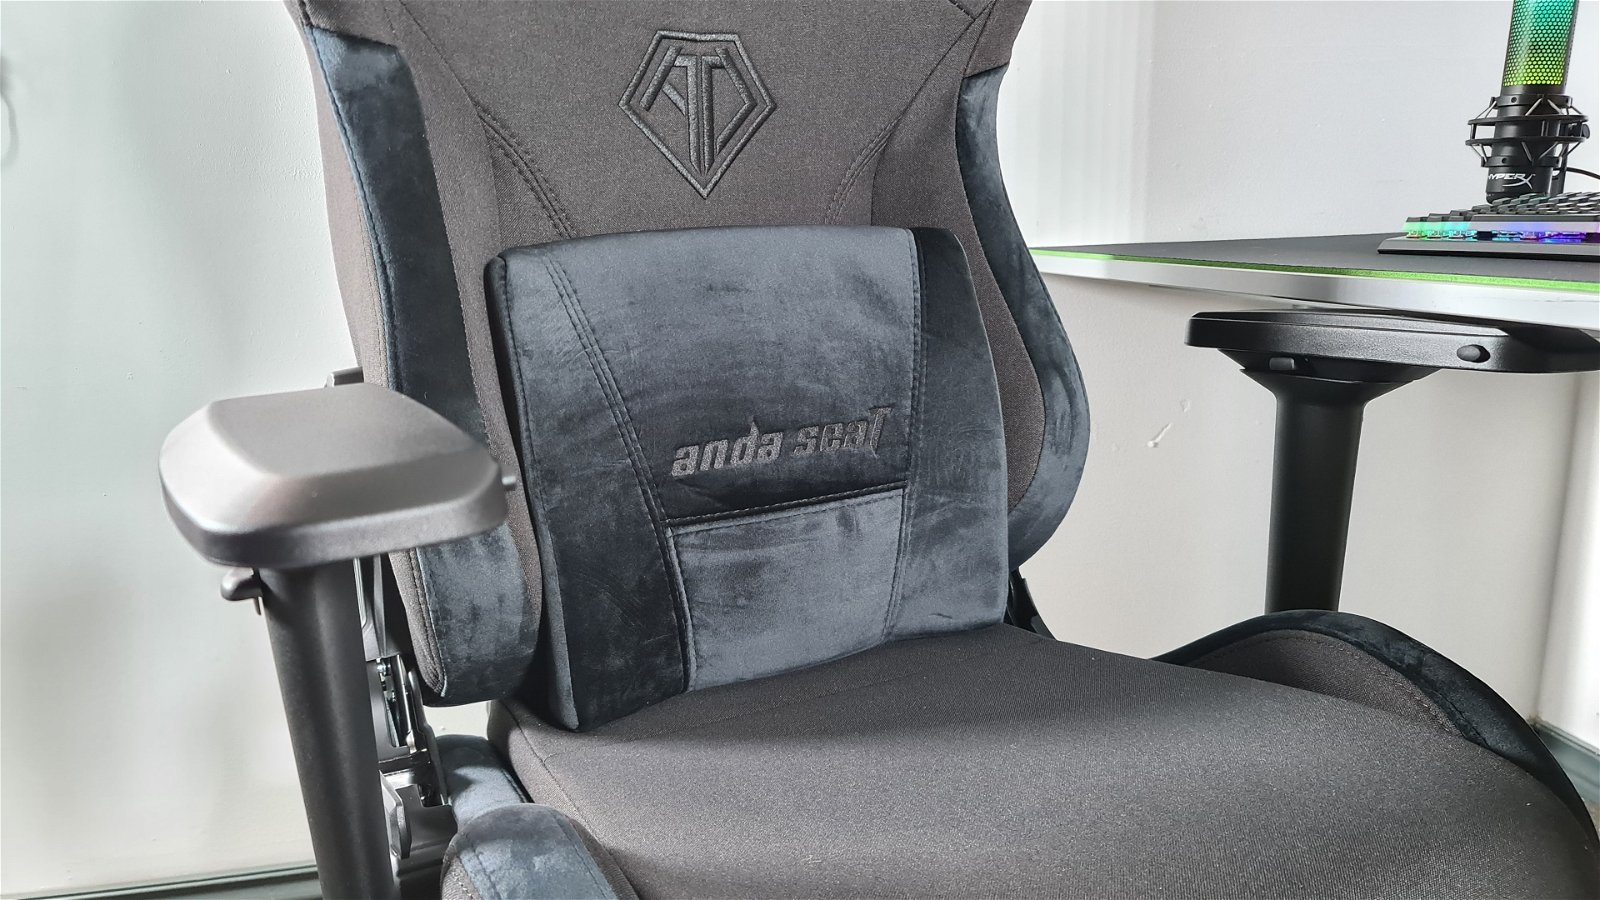 Anda Seat T-Pro II Review